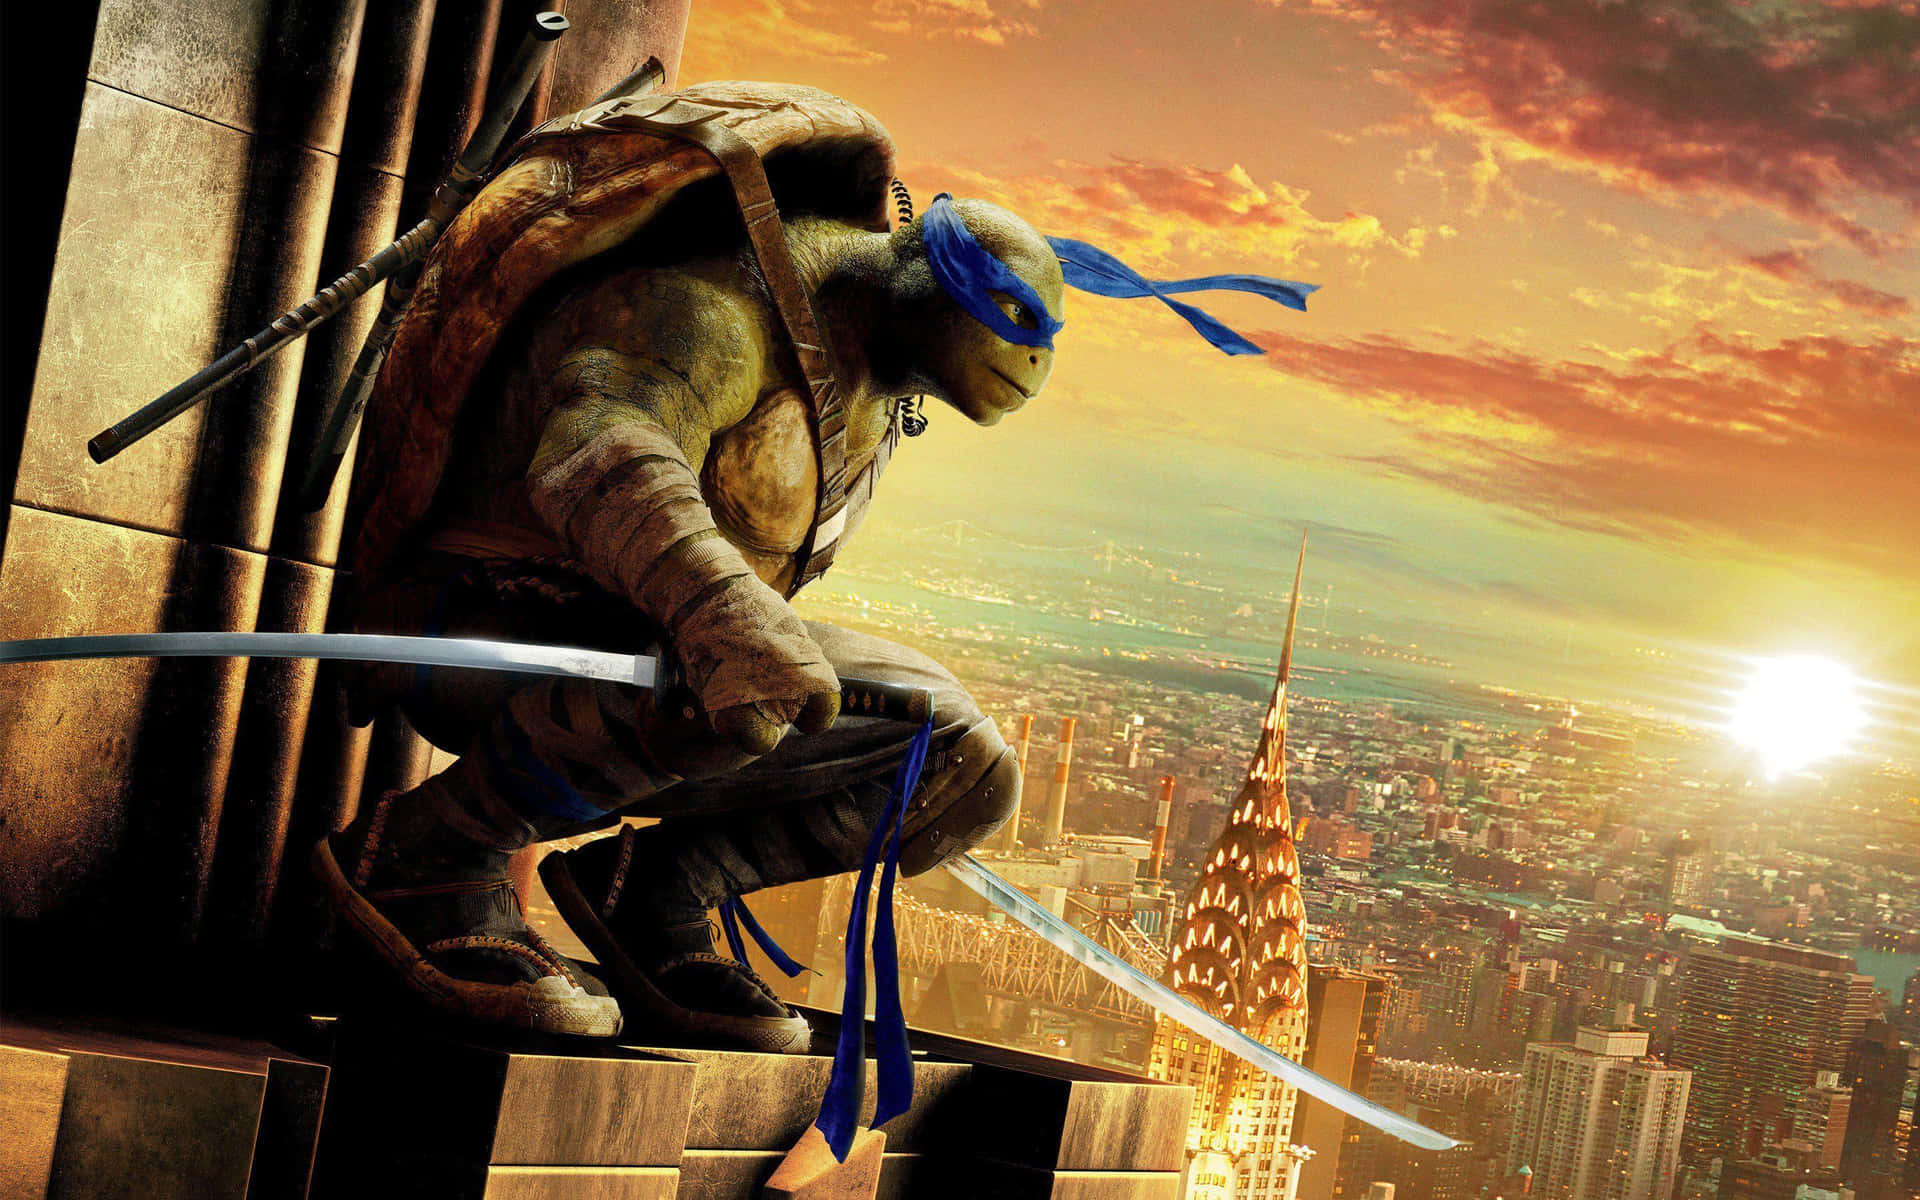 The Fearless Ninja Turtles Pose for an Epic Photoshoot